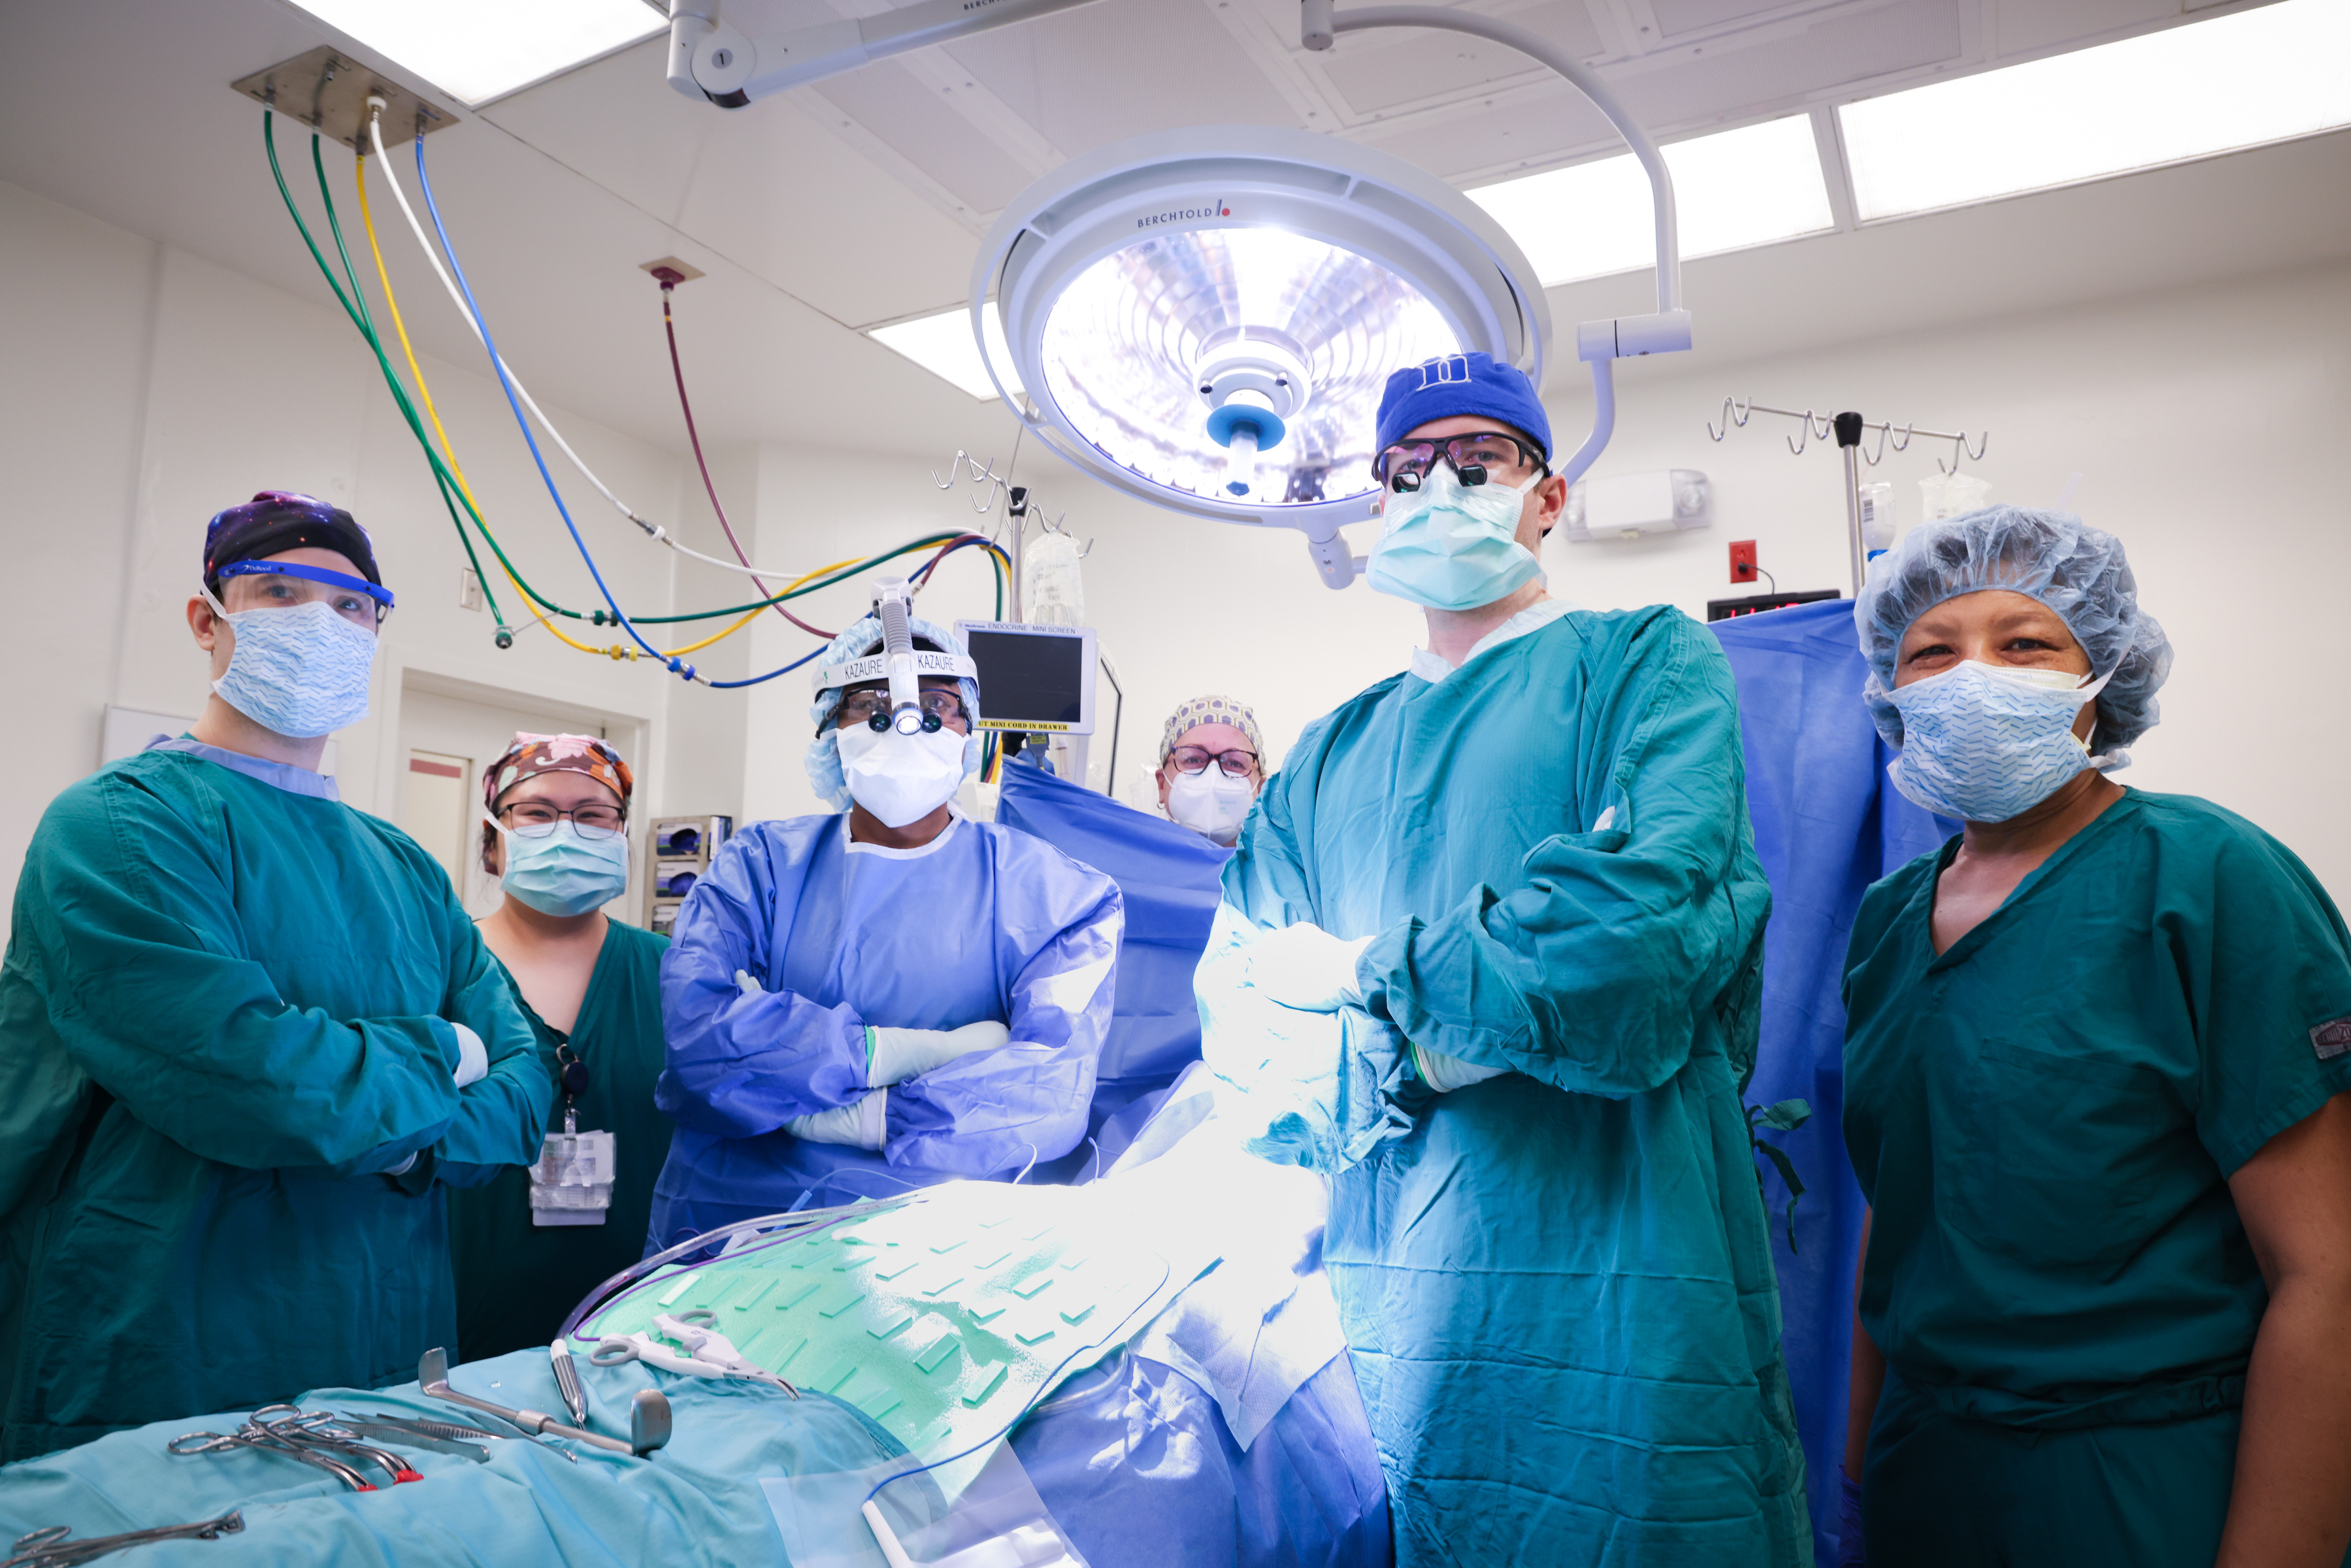 Dr. Kazaure and her surgical team in the operating room